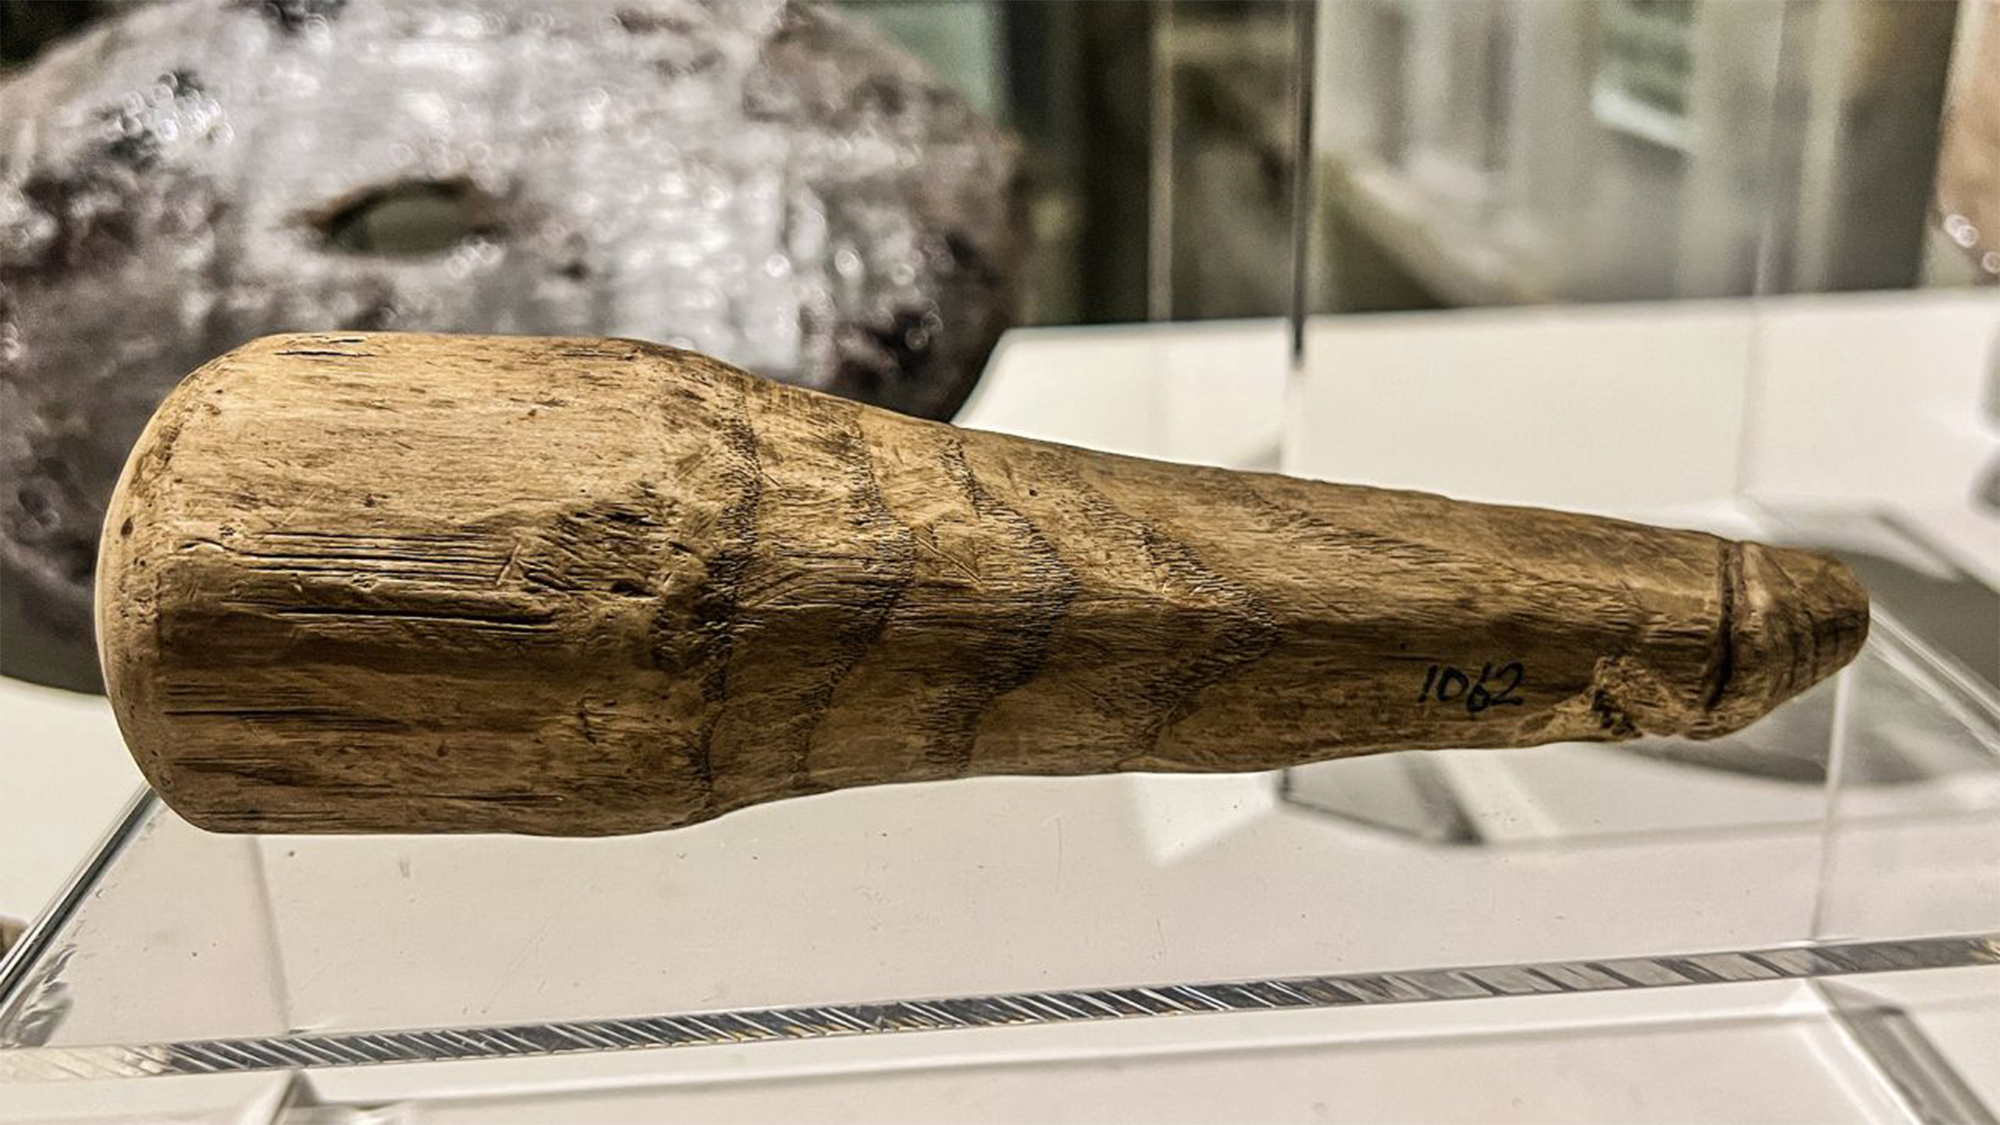 Scientists think they discovered a 2,000-year-old dildo Popular Science pic